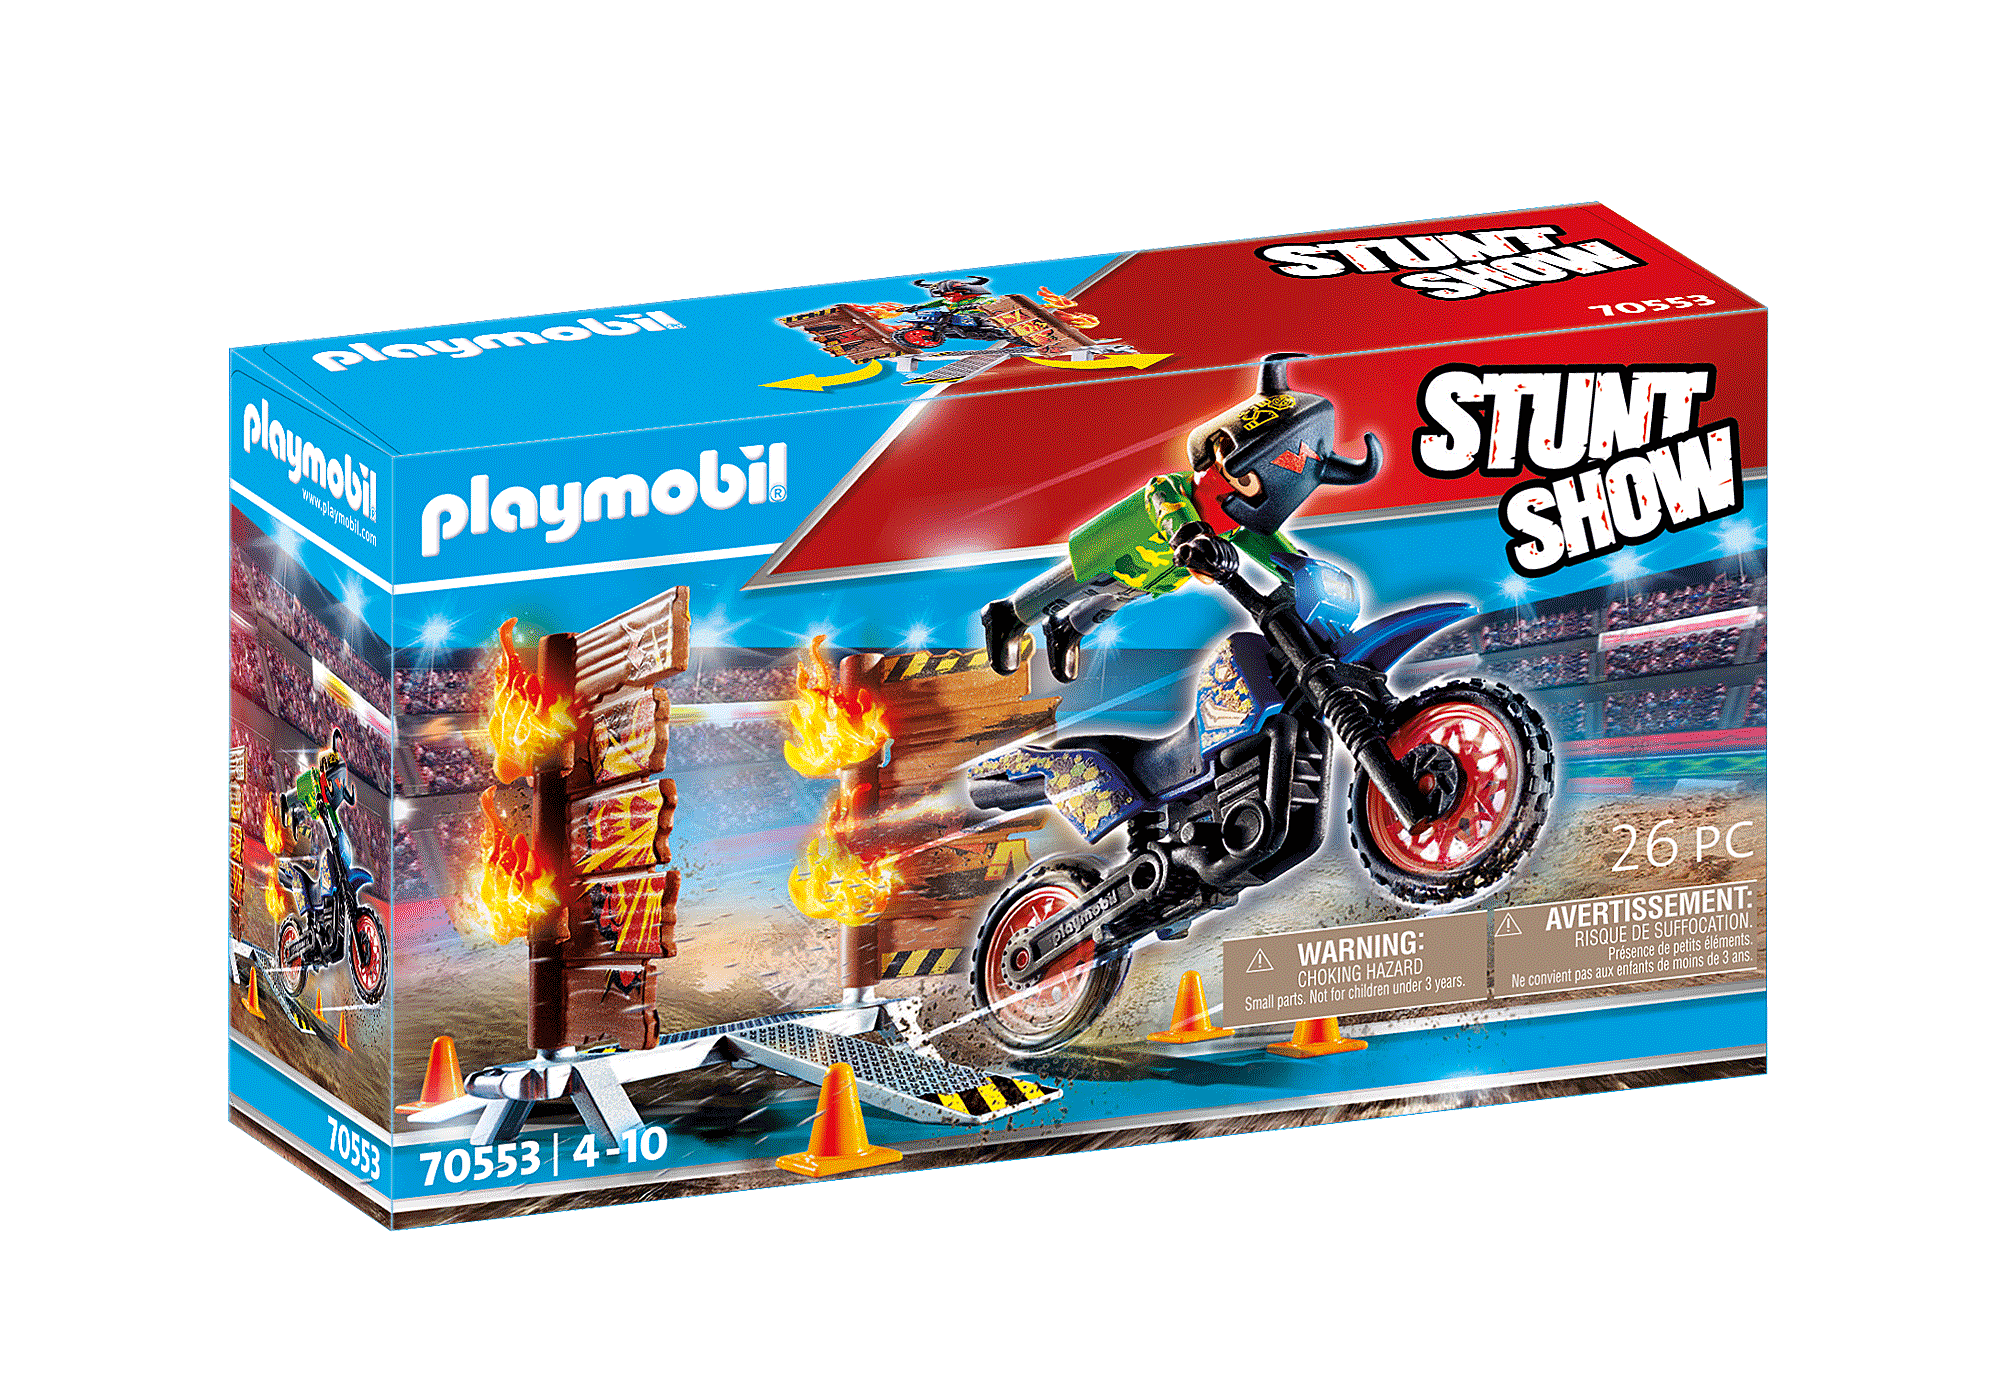 Playmobil Motorcycles ?️ Unboxing Playmobil ? Videos Toys in